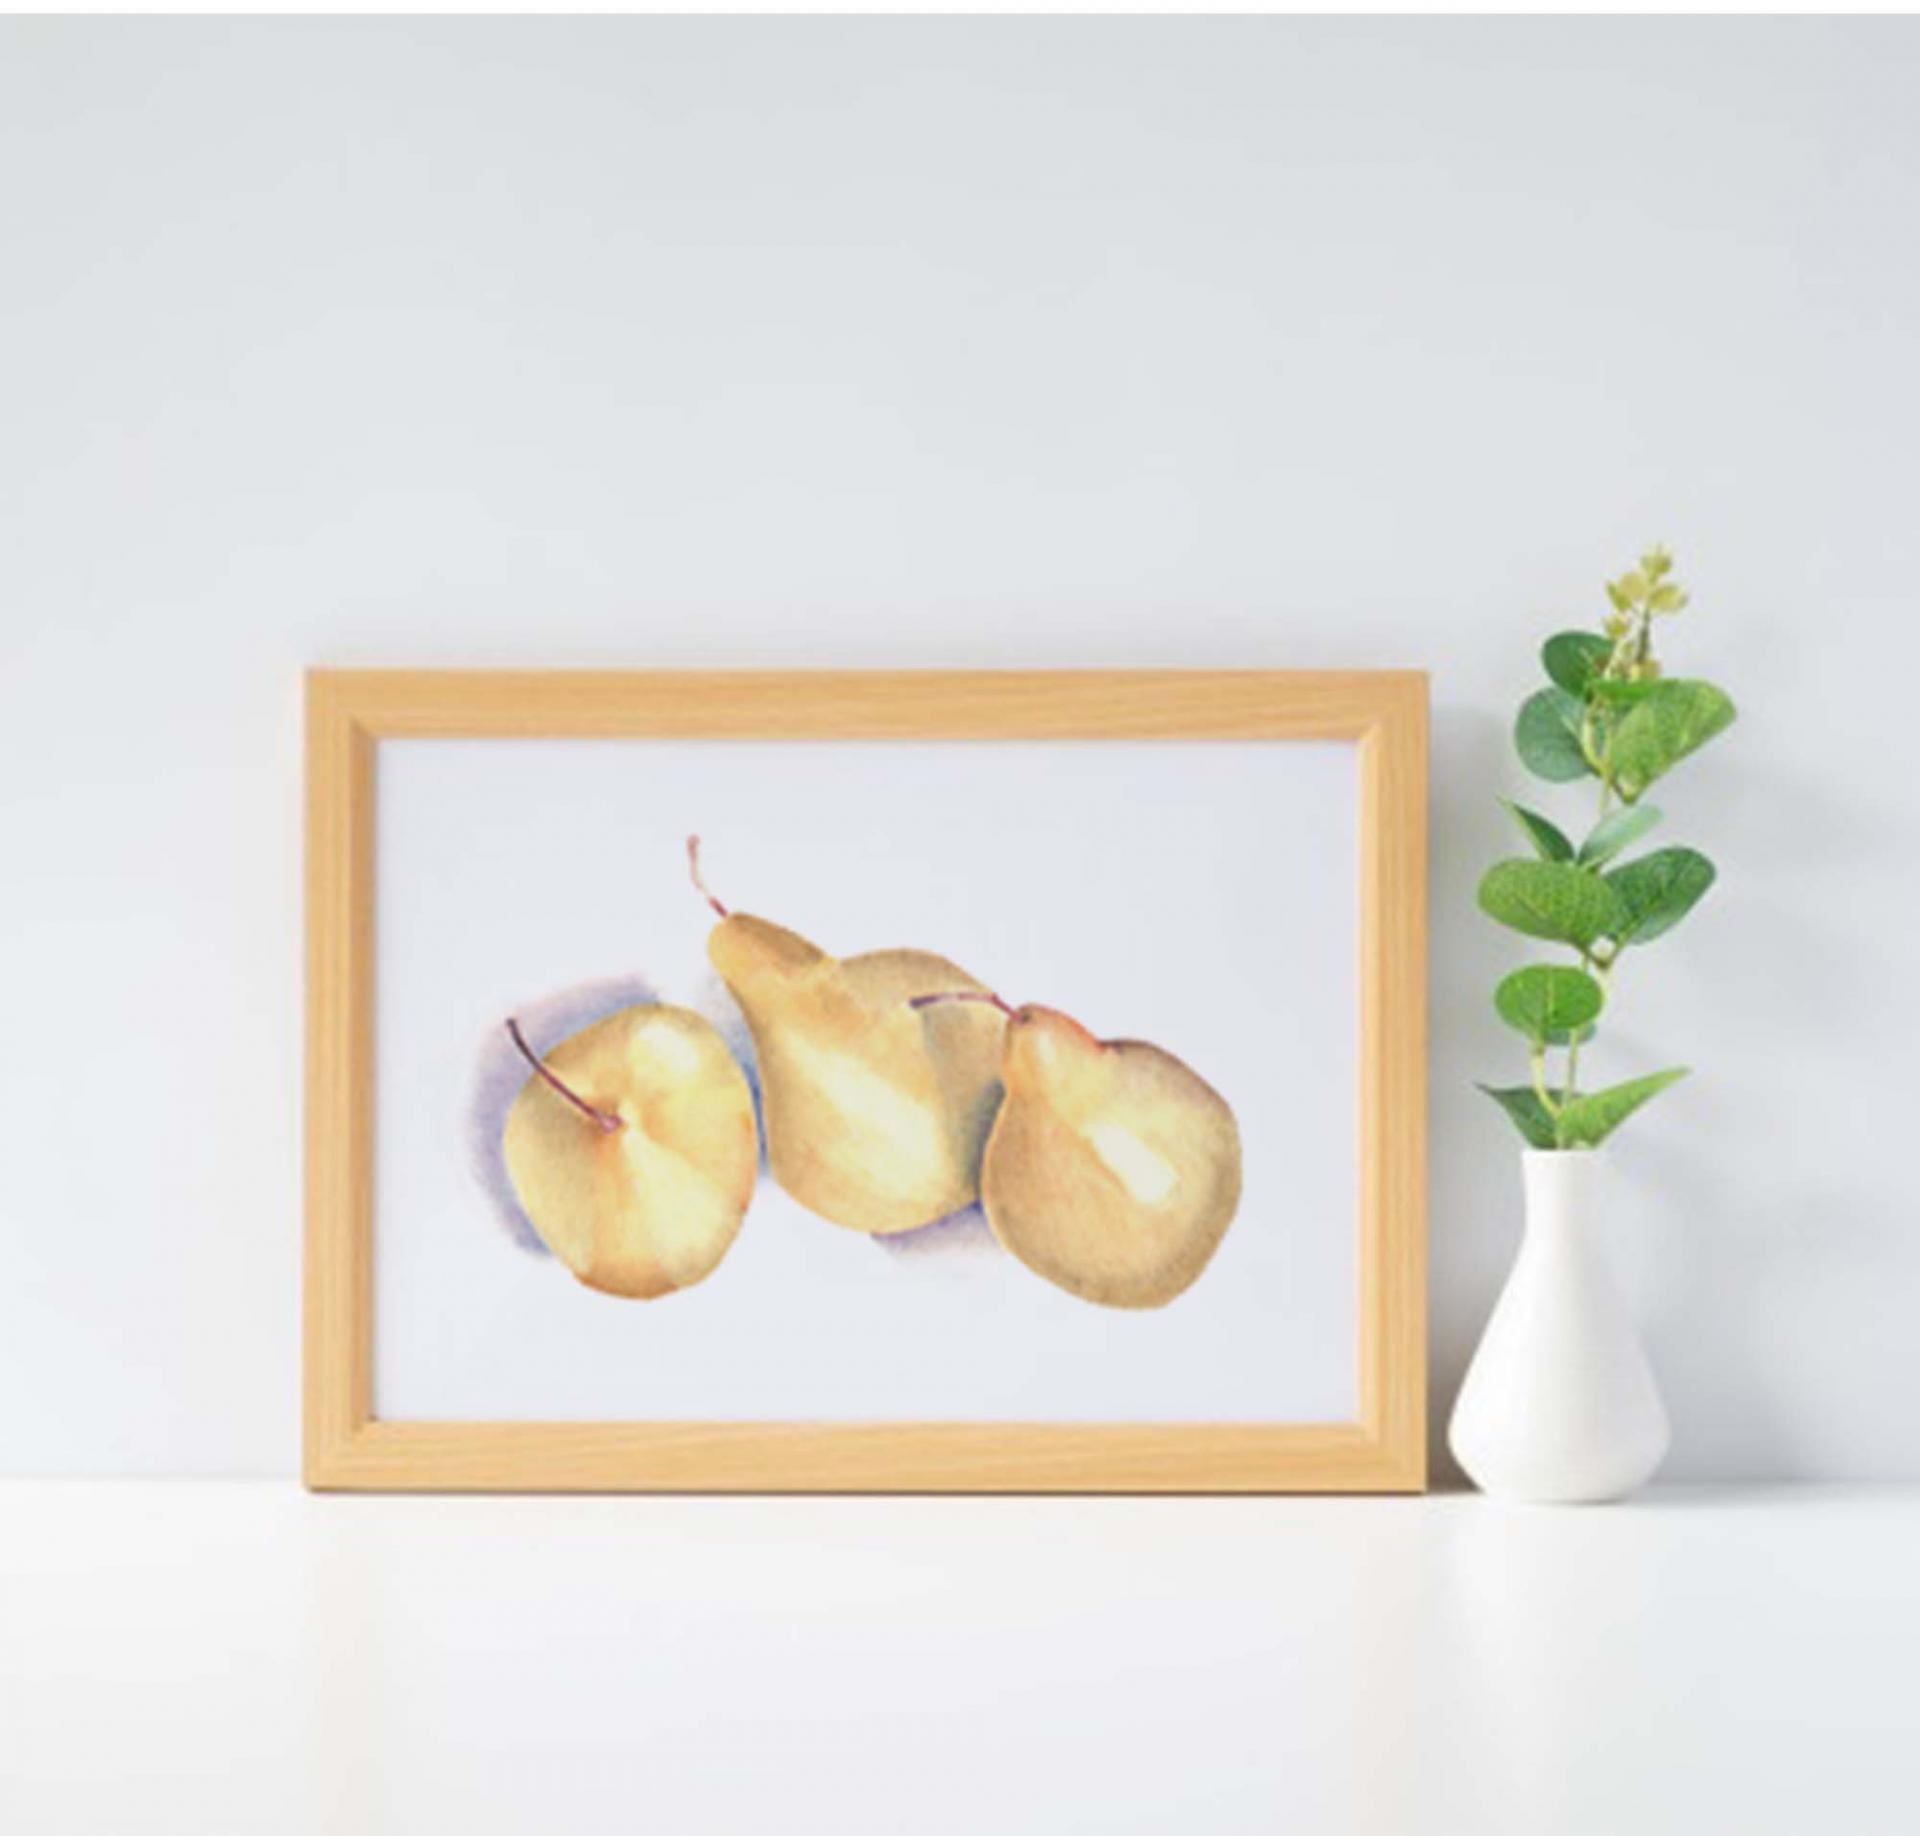 Three Pears in Color Pencil Art Print, Signed by Artist